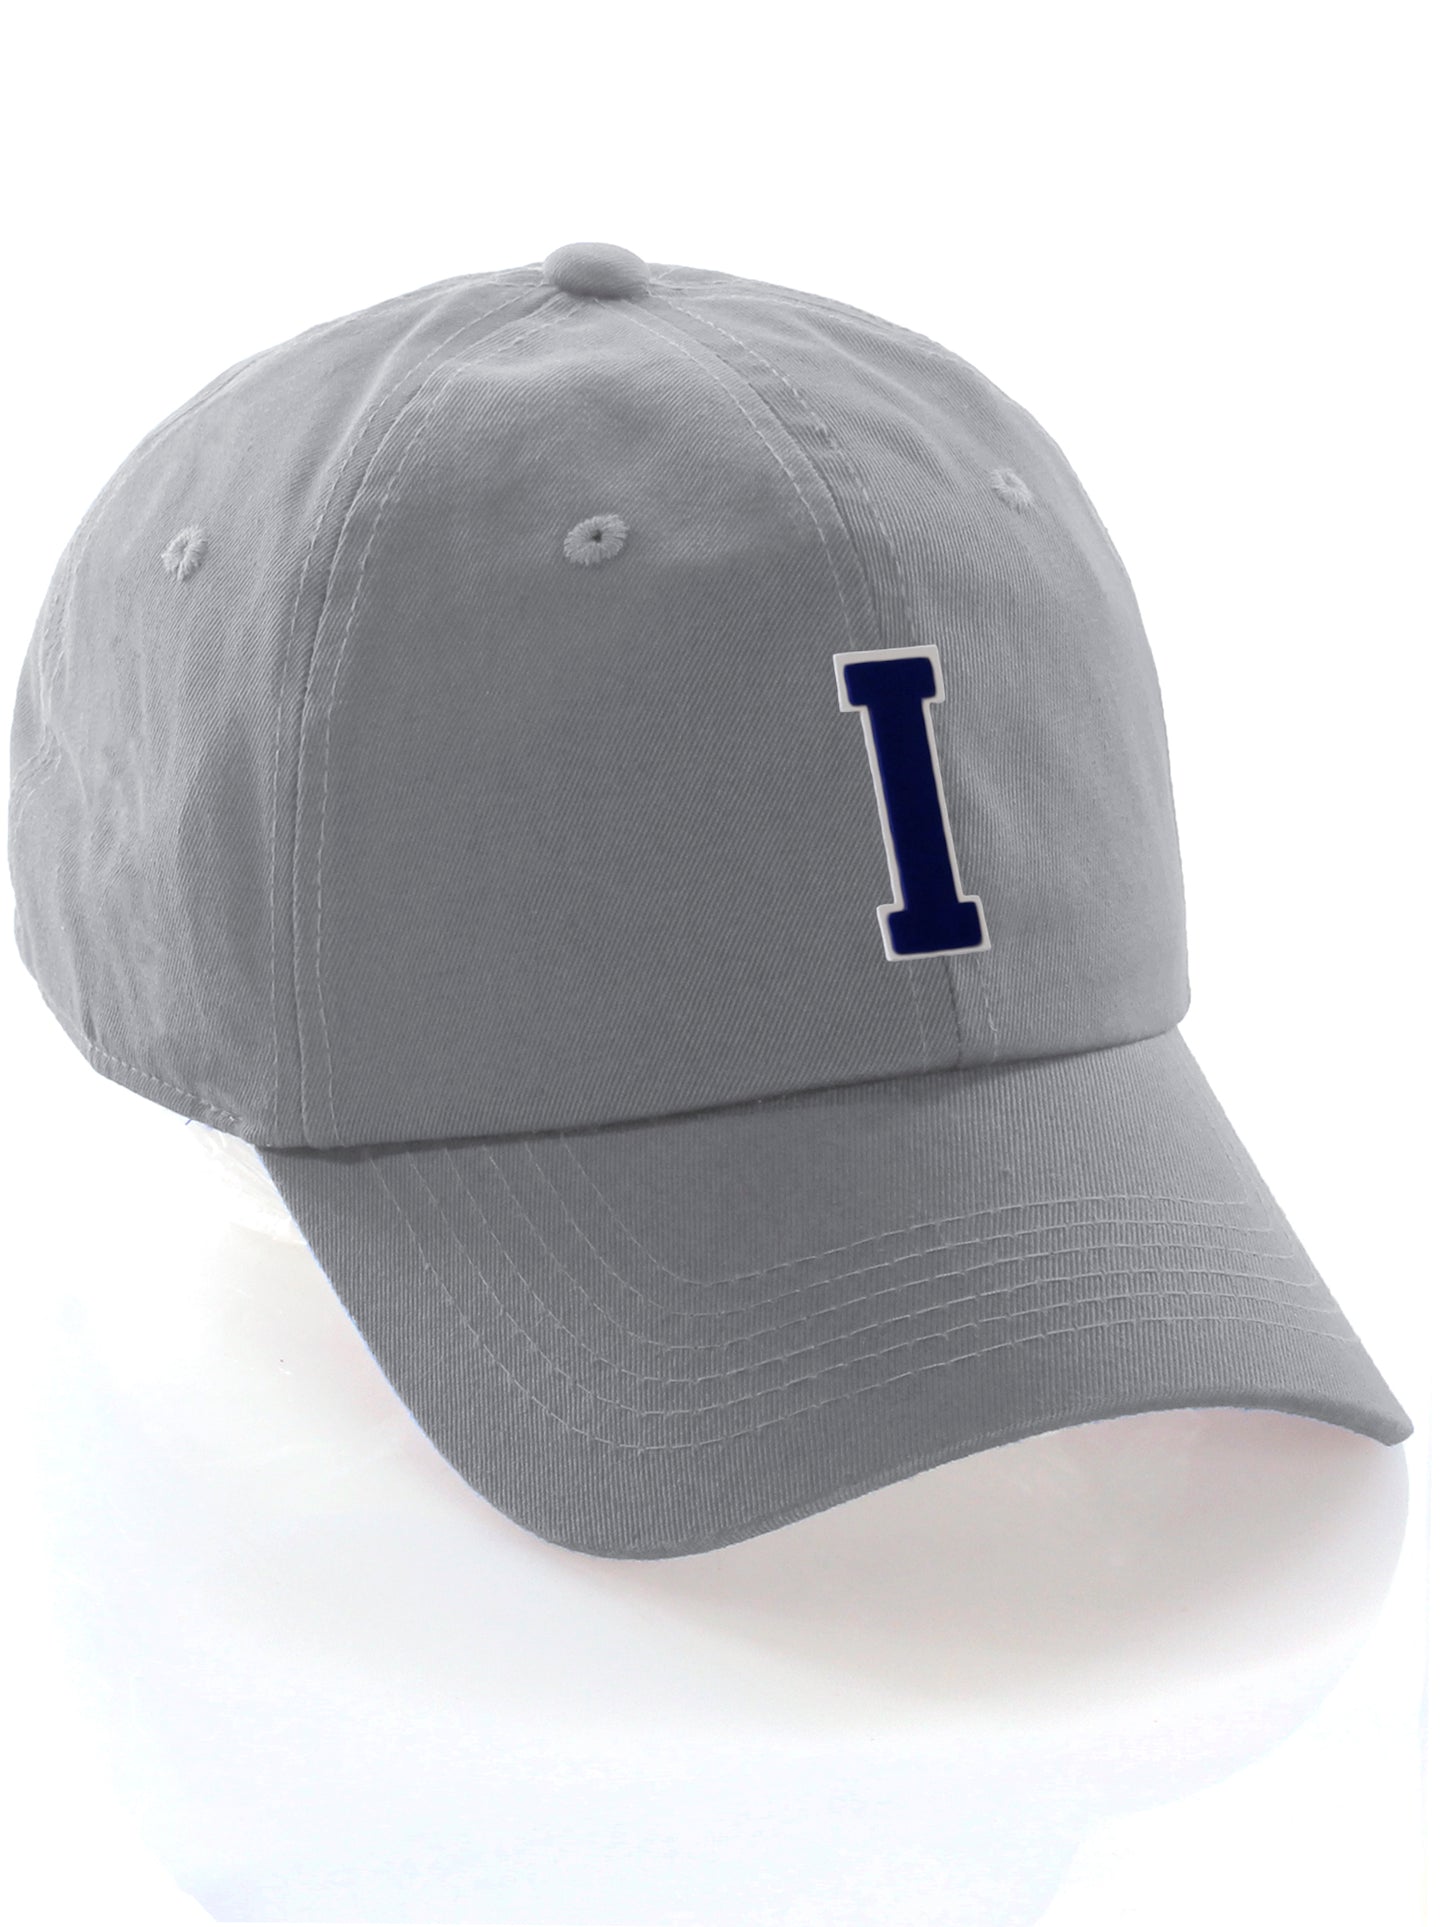 Custom Hat A to Z Initial Letters Classic Baseball Cap, Light Grey White Navy